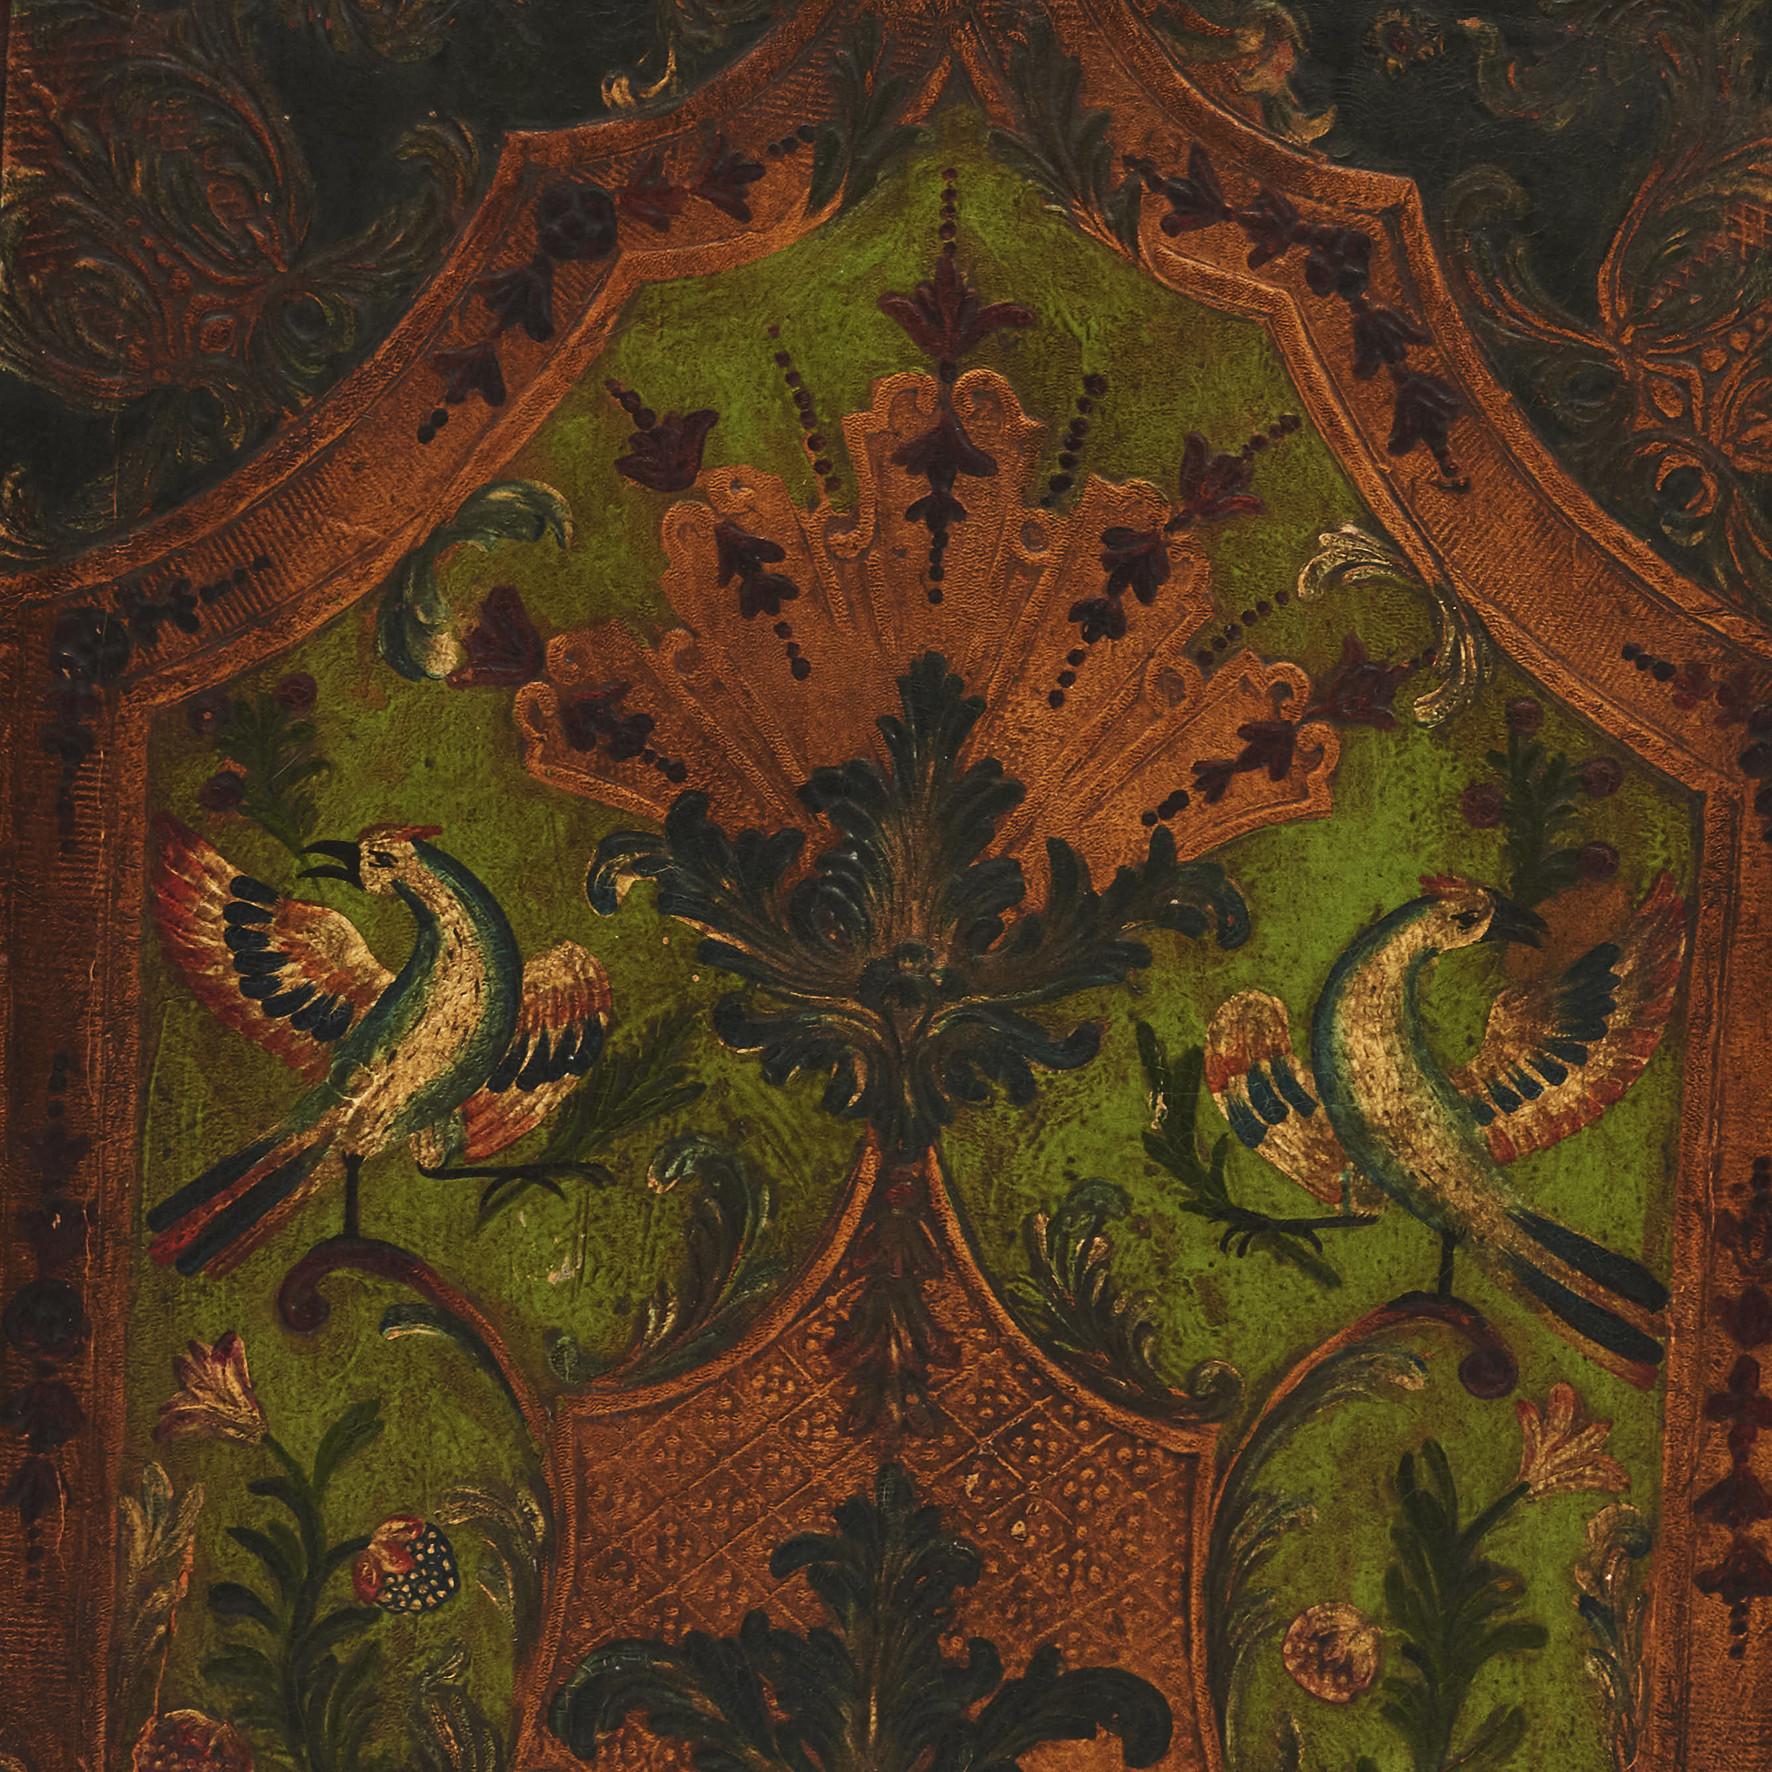 French Baroque style painted three panel folding leather screen depicting birds and floral motifs.
France mid-19th century.
Very decorative and in good condition.